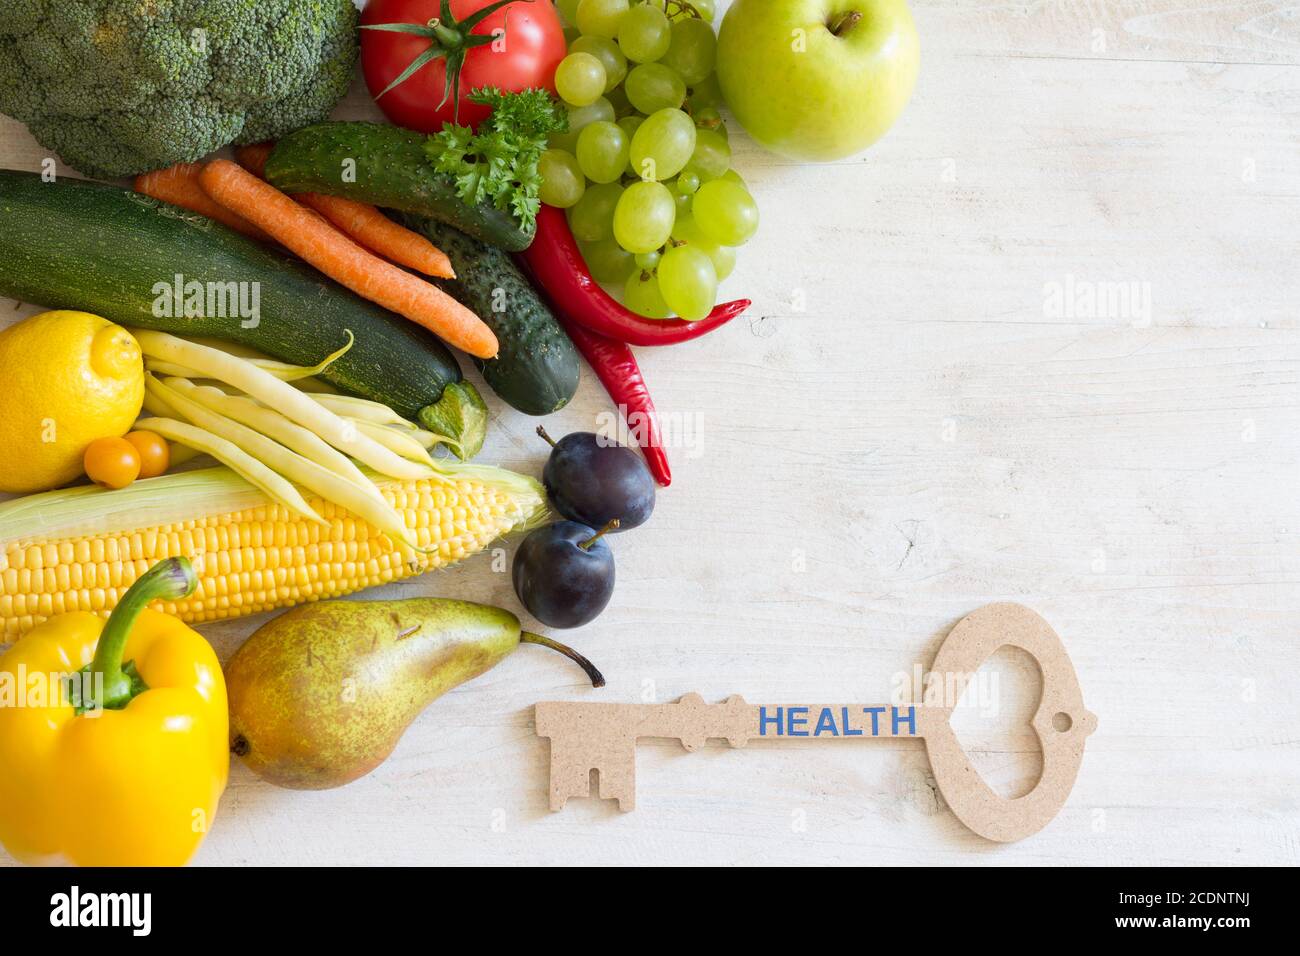 Key to health. Vegetables and fruits with key, healthy lifestyle concept Stock Photo